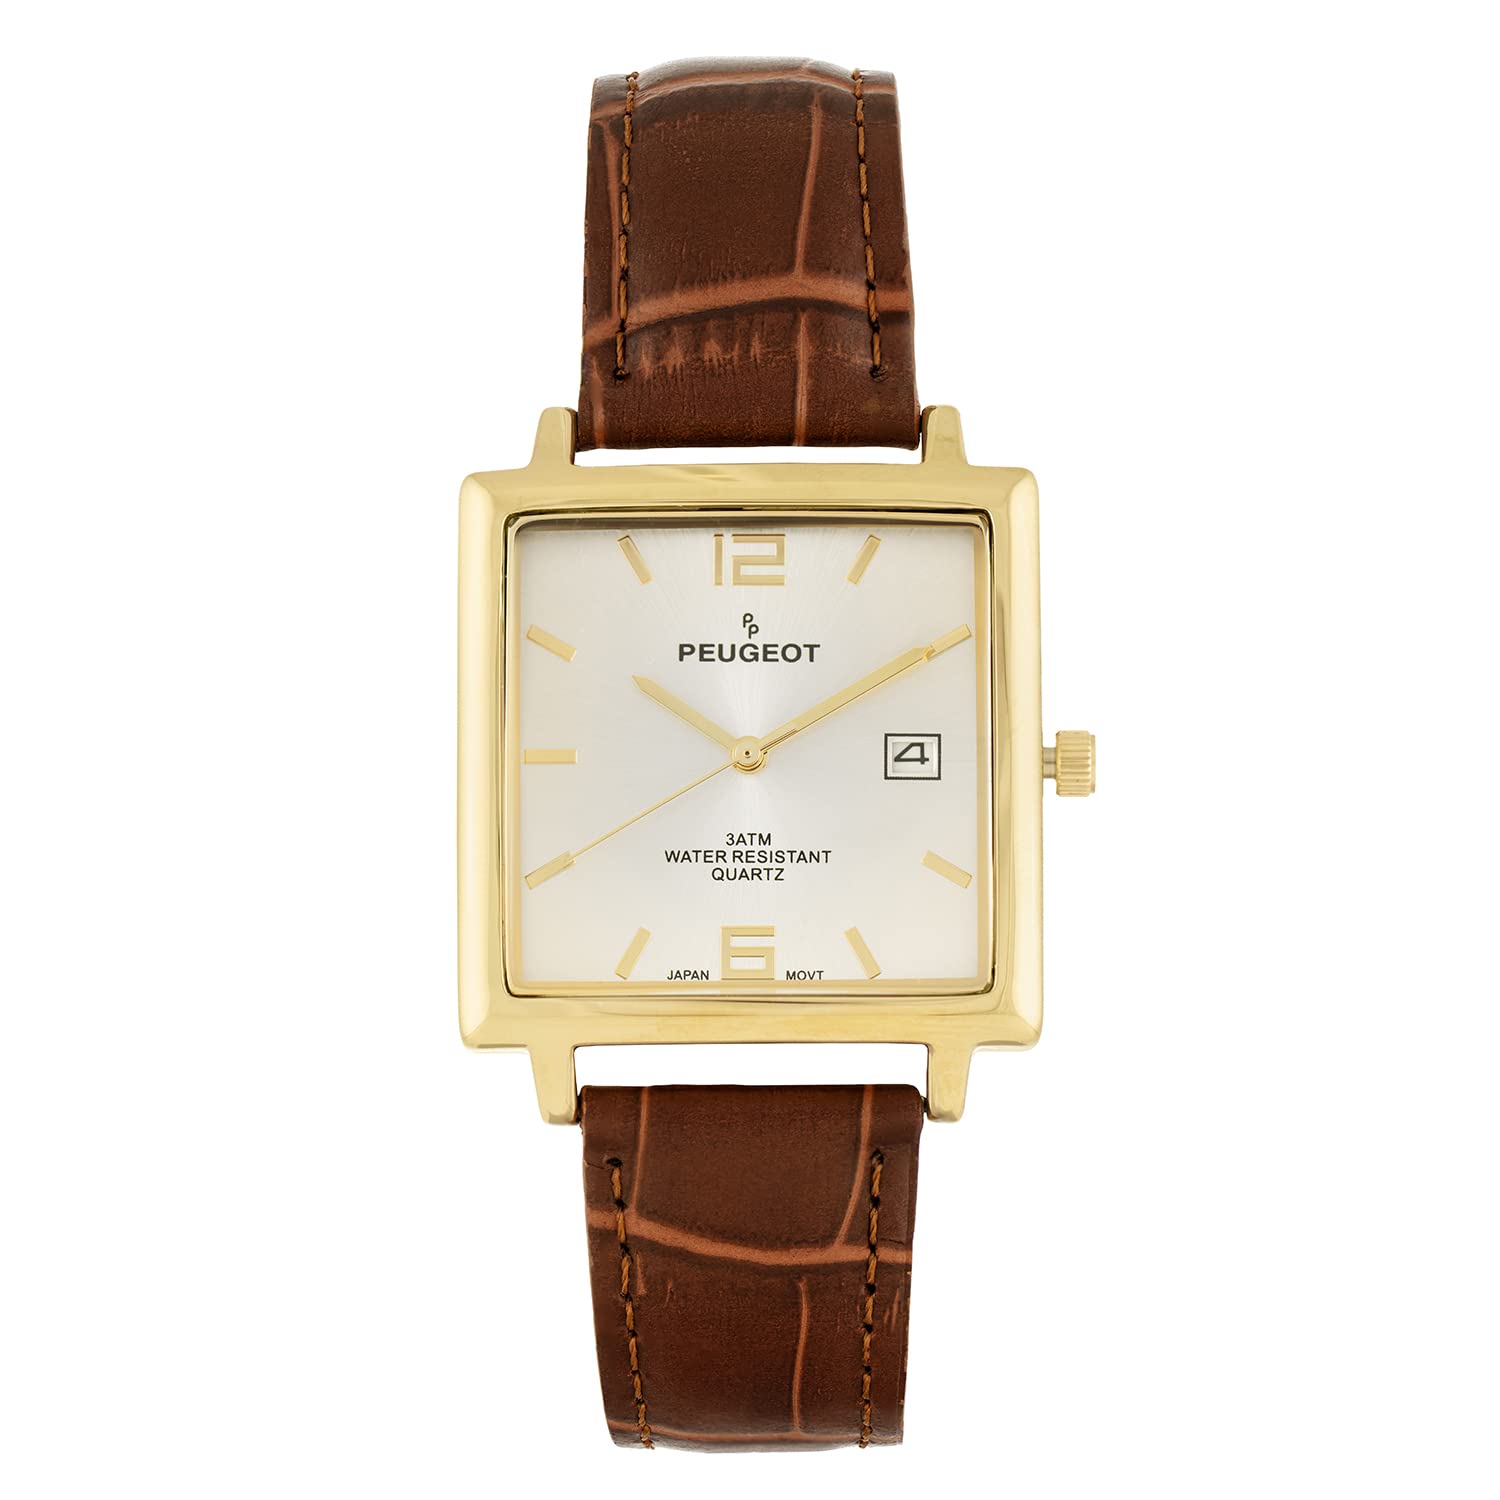 Peugeot Men’s Modern Square Casual Quartz Wrist Watch with Gold Plated Case and Genuine Leather Strap